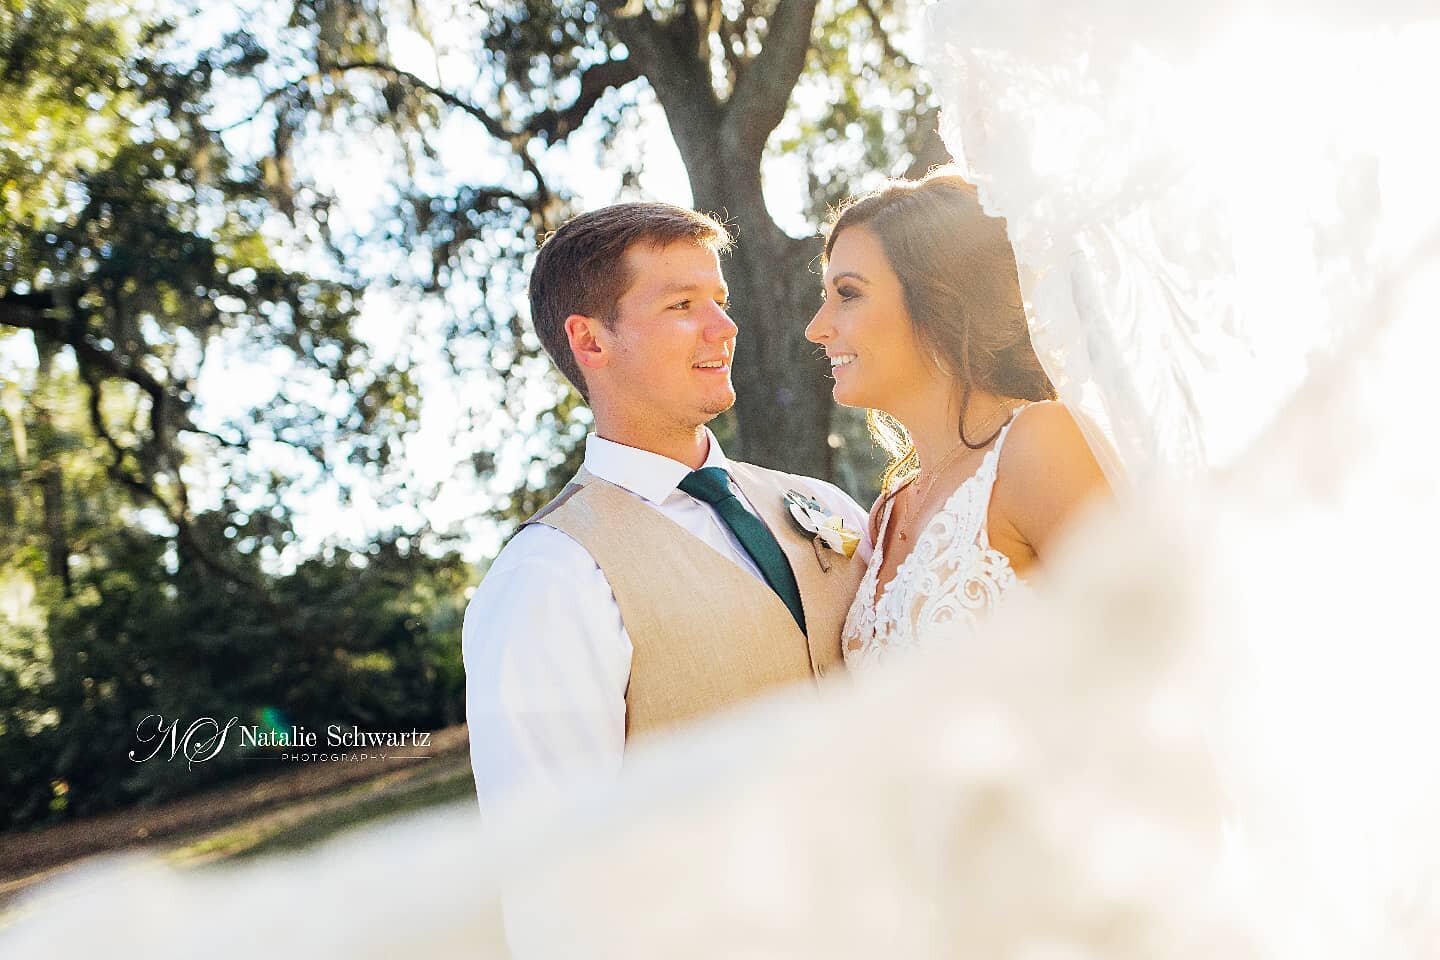 Hopefully you two are having the time of your lives on your honeymoon because your wedding was a dream ❤️

#oncewed #southernweddingphotographer
#southernbride #southernlivingmag
#pawleysisland
#southcarolina #weddingphotographer #travelingphotograph